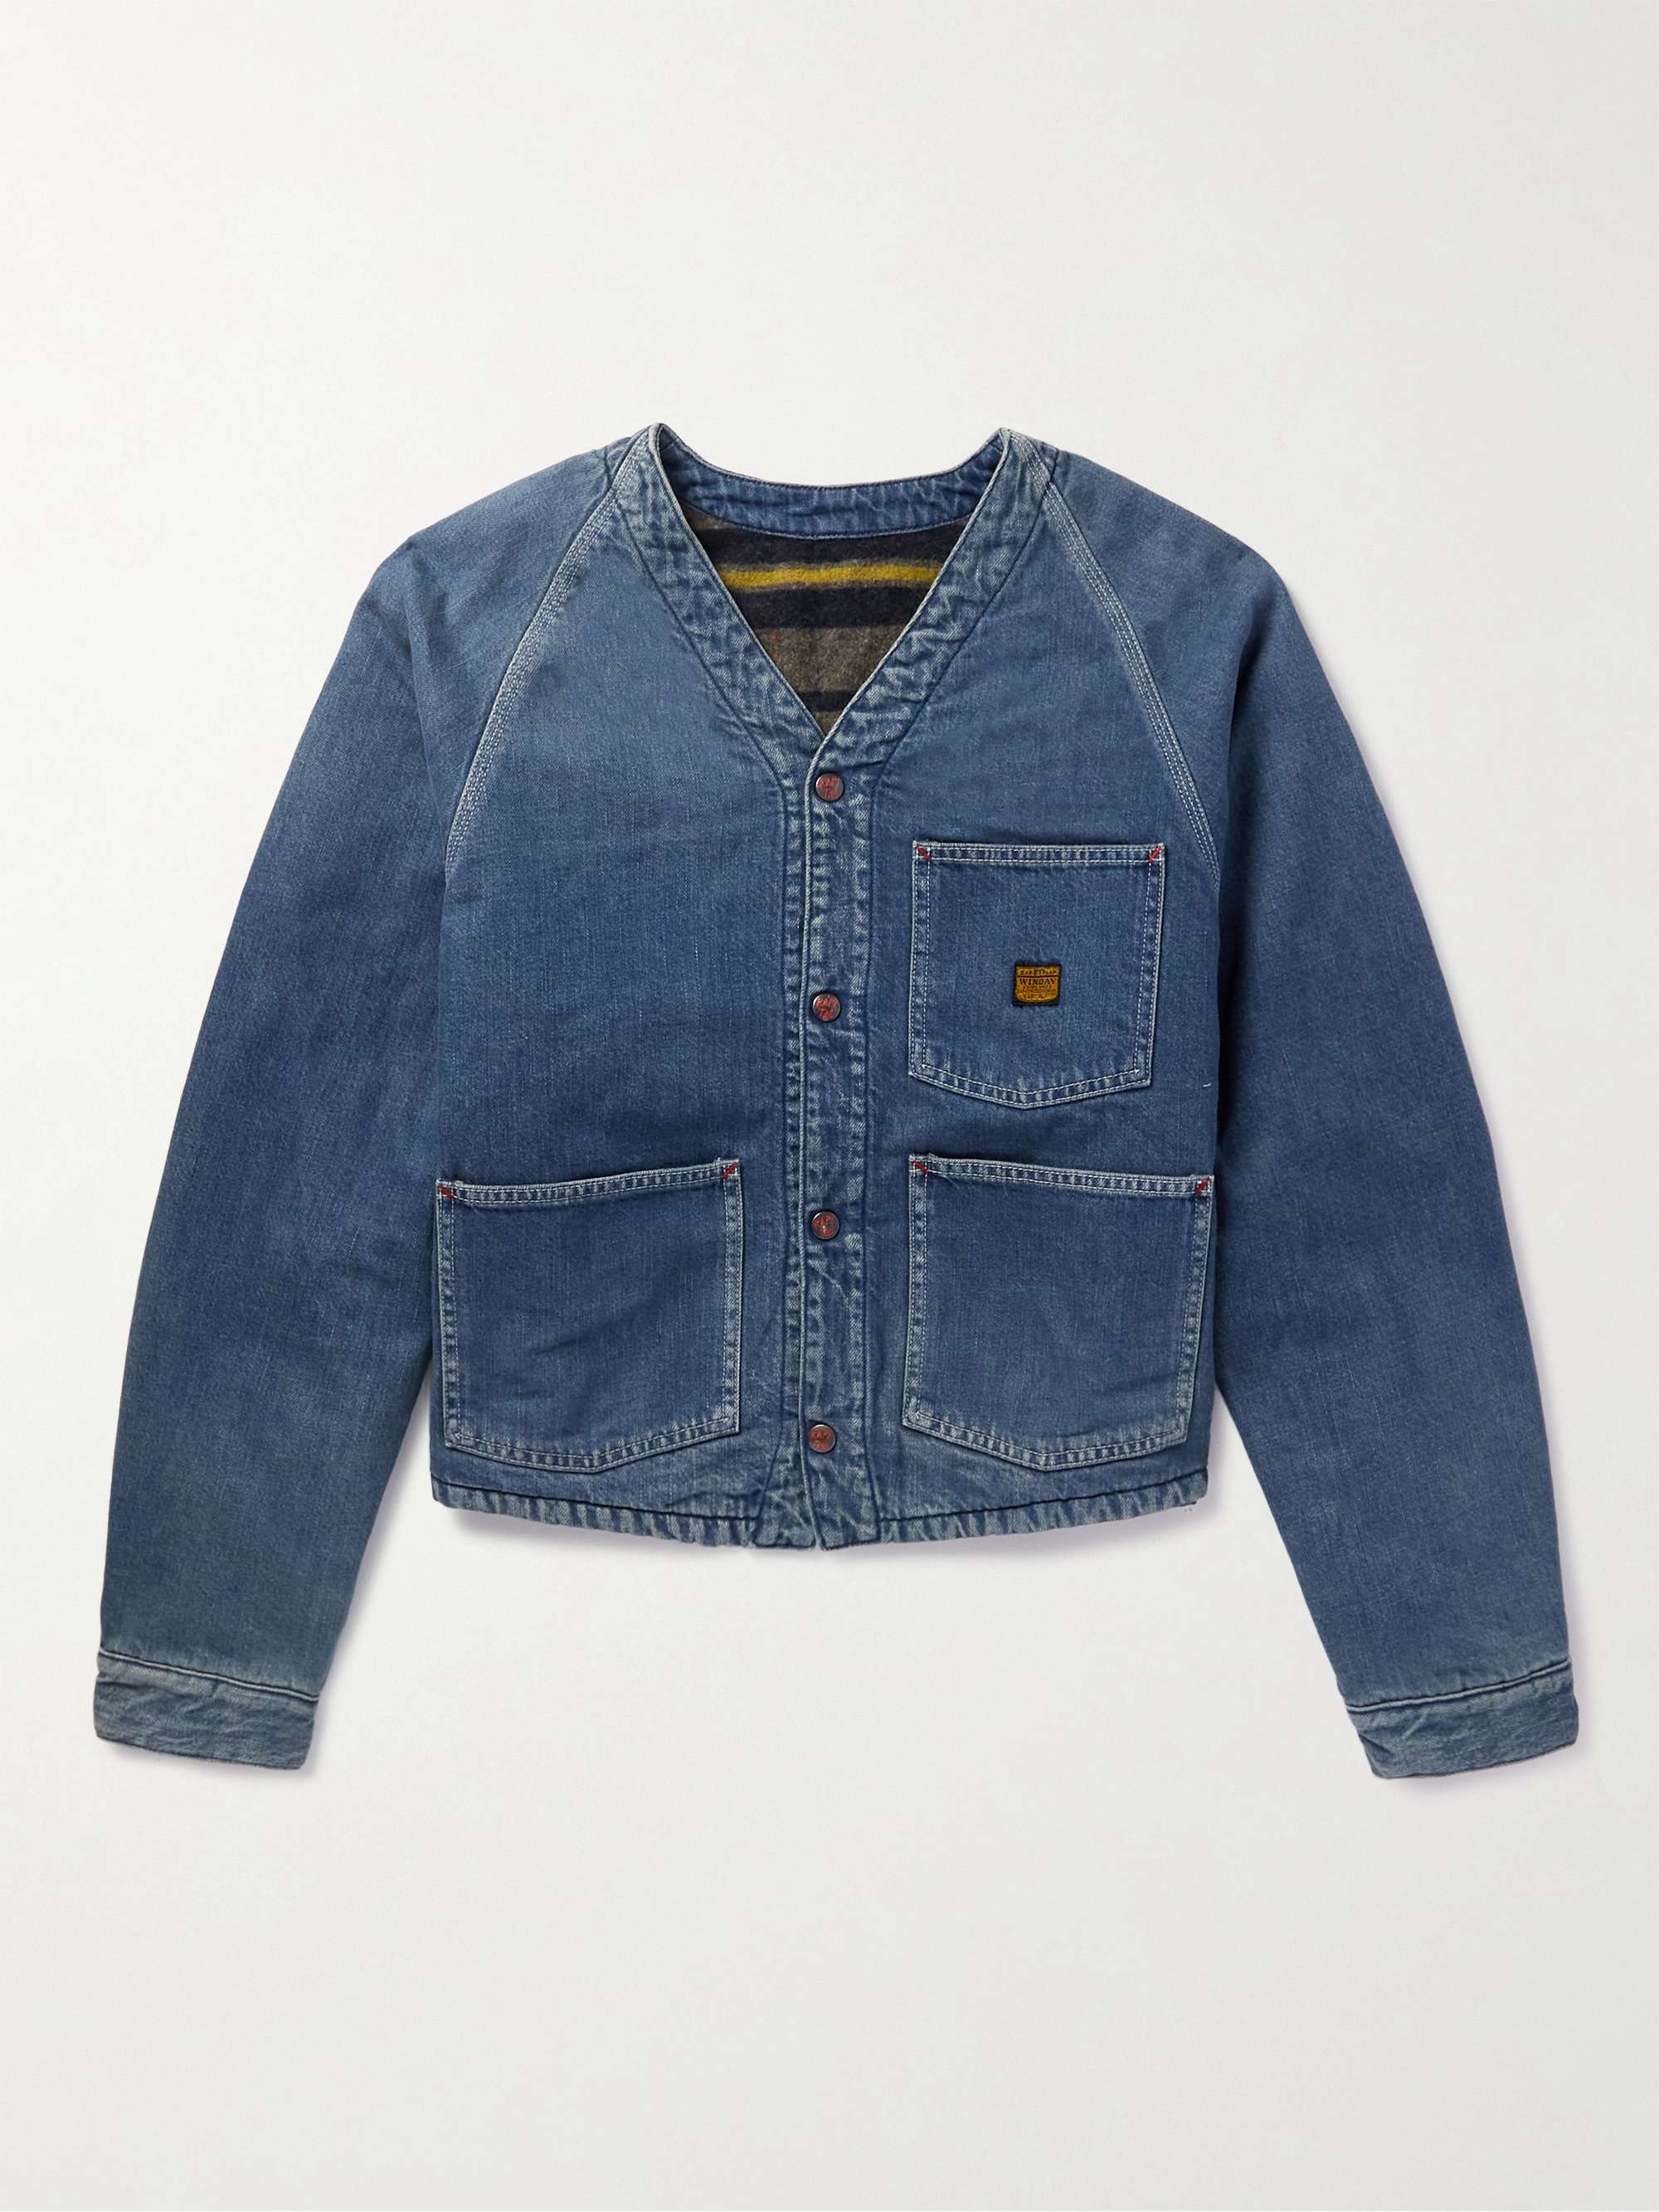 KAPITAL Coneybowy Reversible Denim and Striped Knitted Jacket | MR PORTER